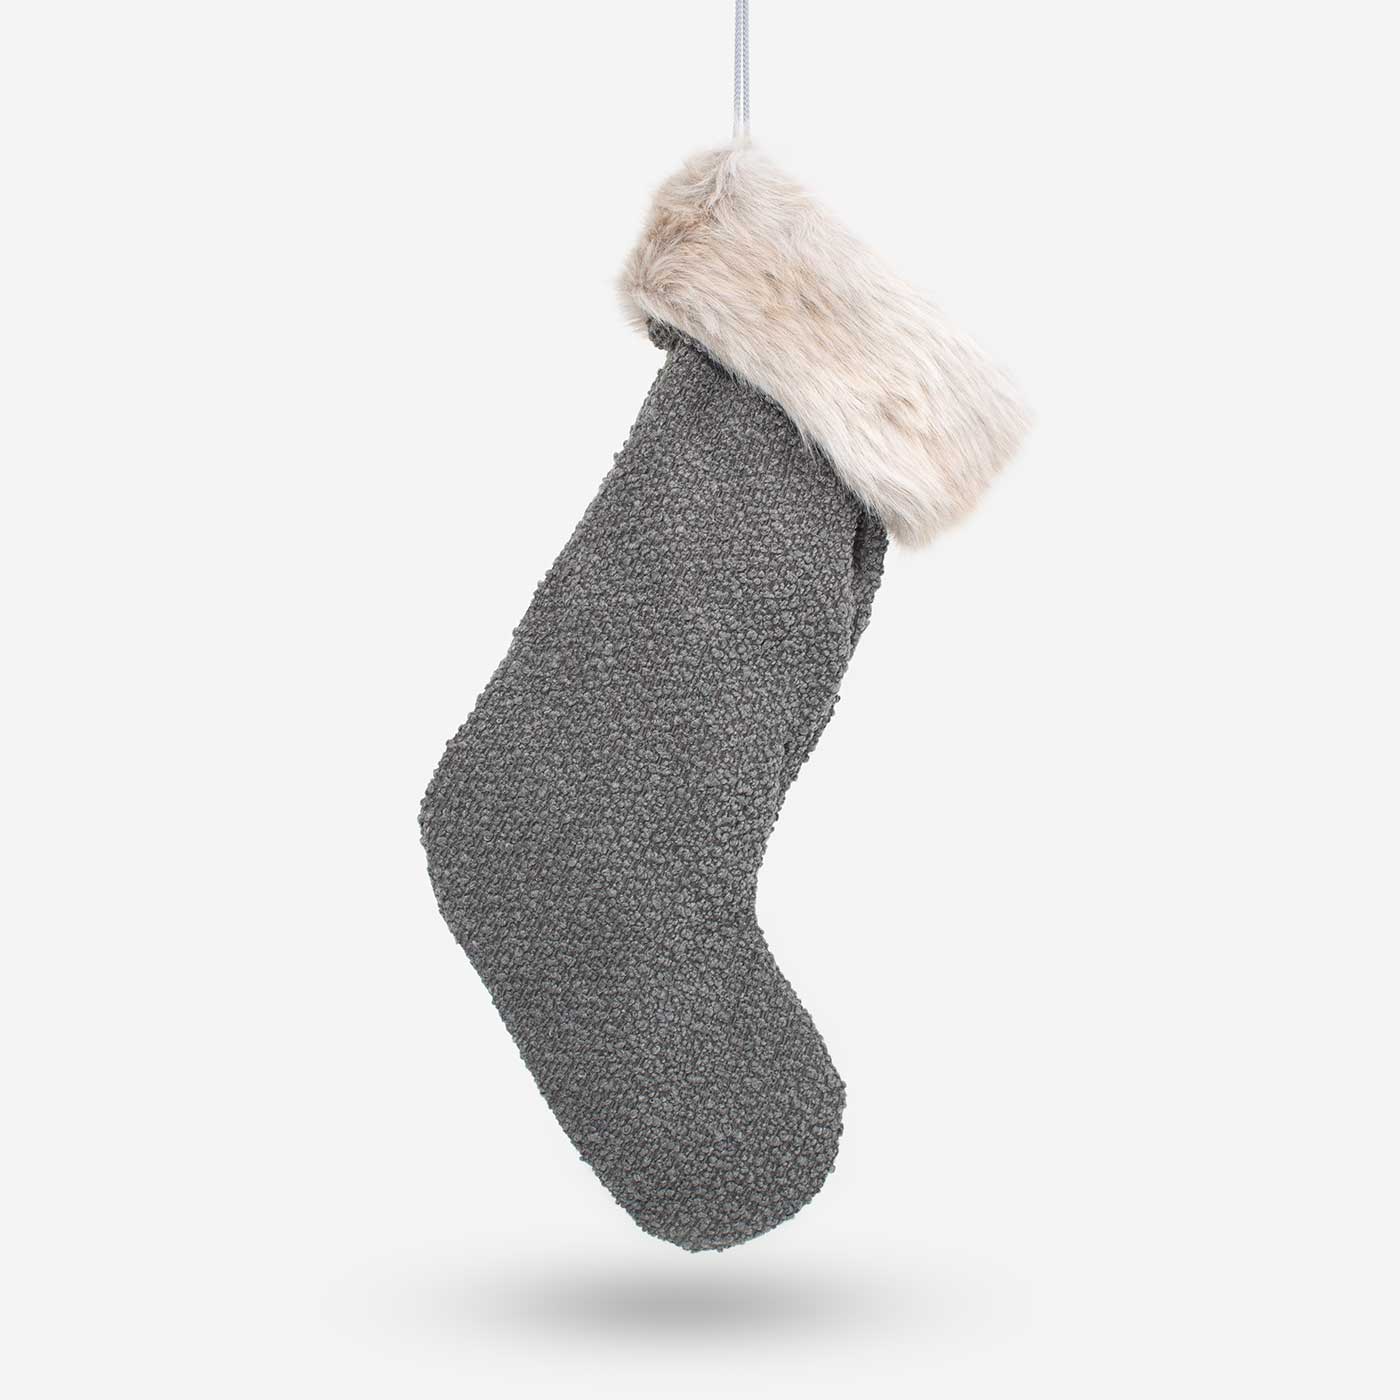 Gift your furry friend the perfect pet Christmas gift with our beautifully crafted Christmas Stocking Sock, fill and gift your pet this festive holiday with the most wholesome gifts for Christmas! Available now in stunning Granite Boucle at Lords & Labradors    